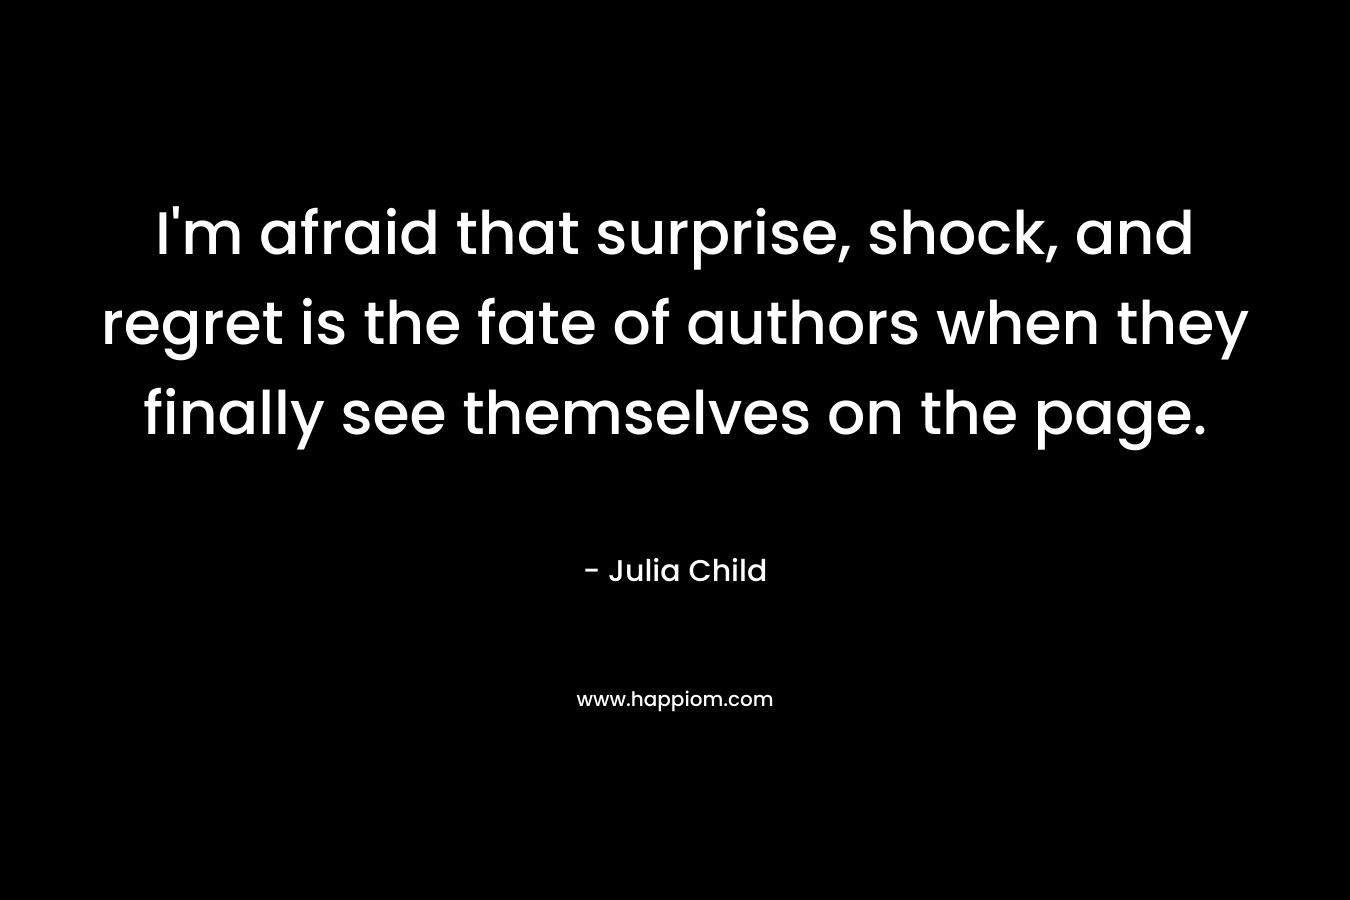 I’m afraid that surprise, shock, and regret is the fate of authors when they finally see themselves on the page. – Julia Child